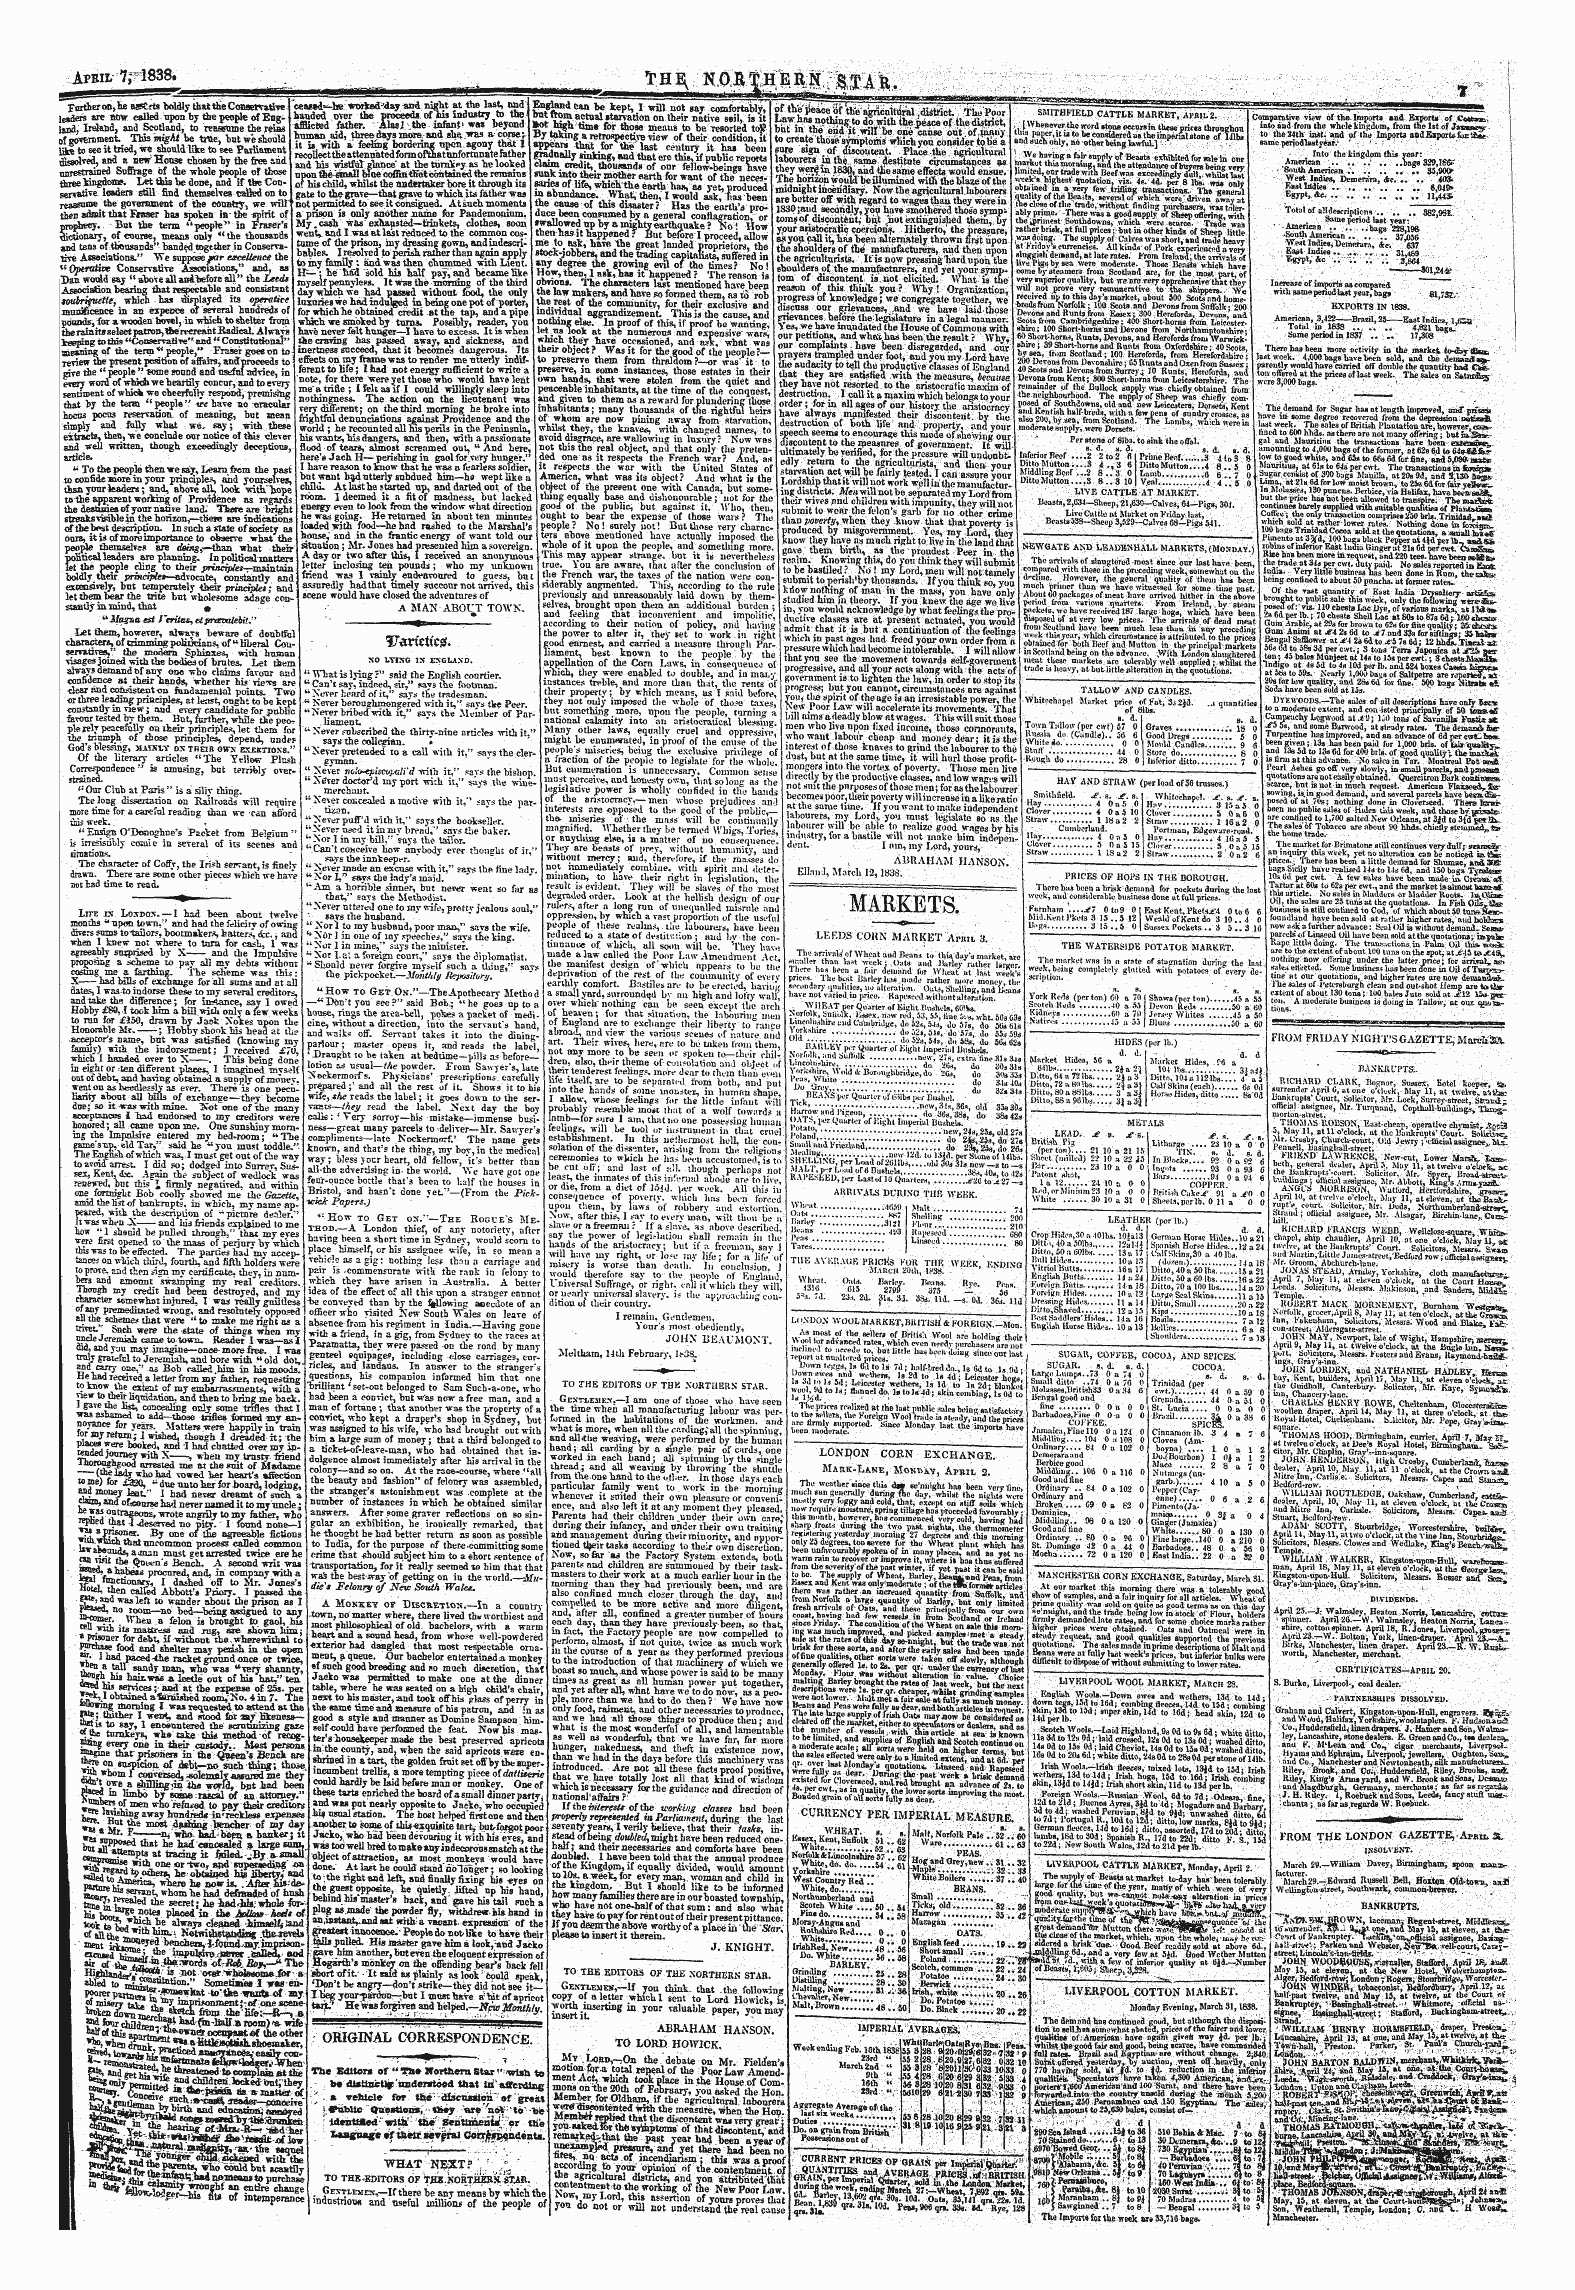 Northern Star (1837-1852): jS F Y, 1st edition - From Friday Night's Gazette: Marcltm